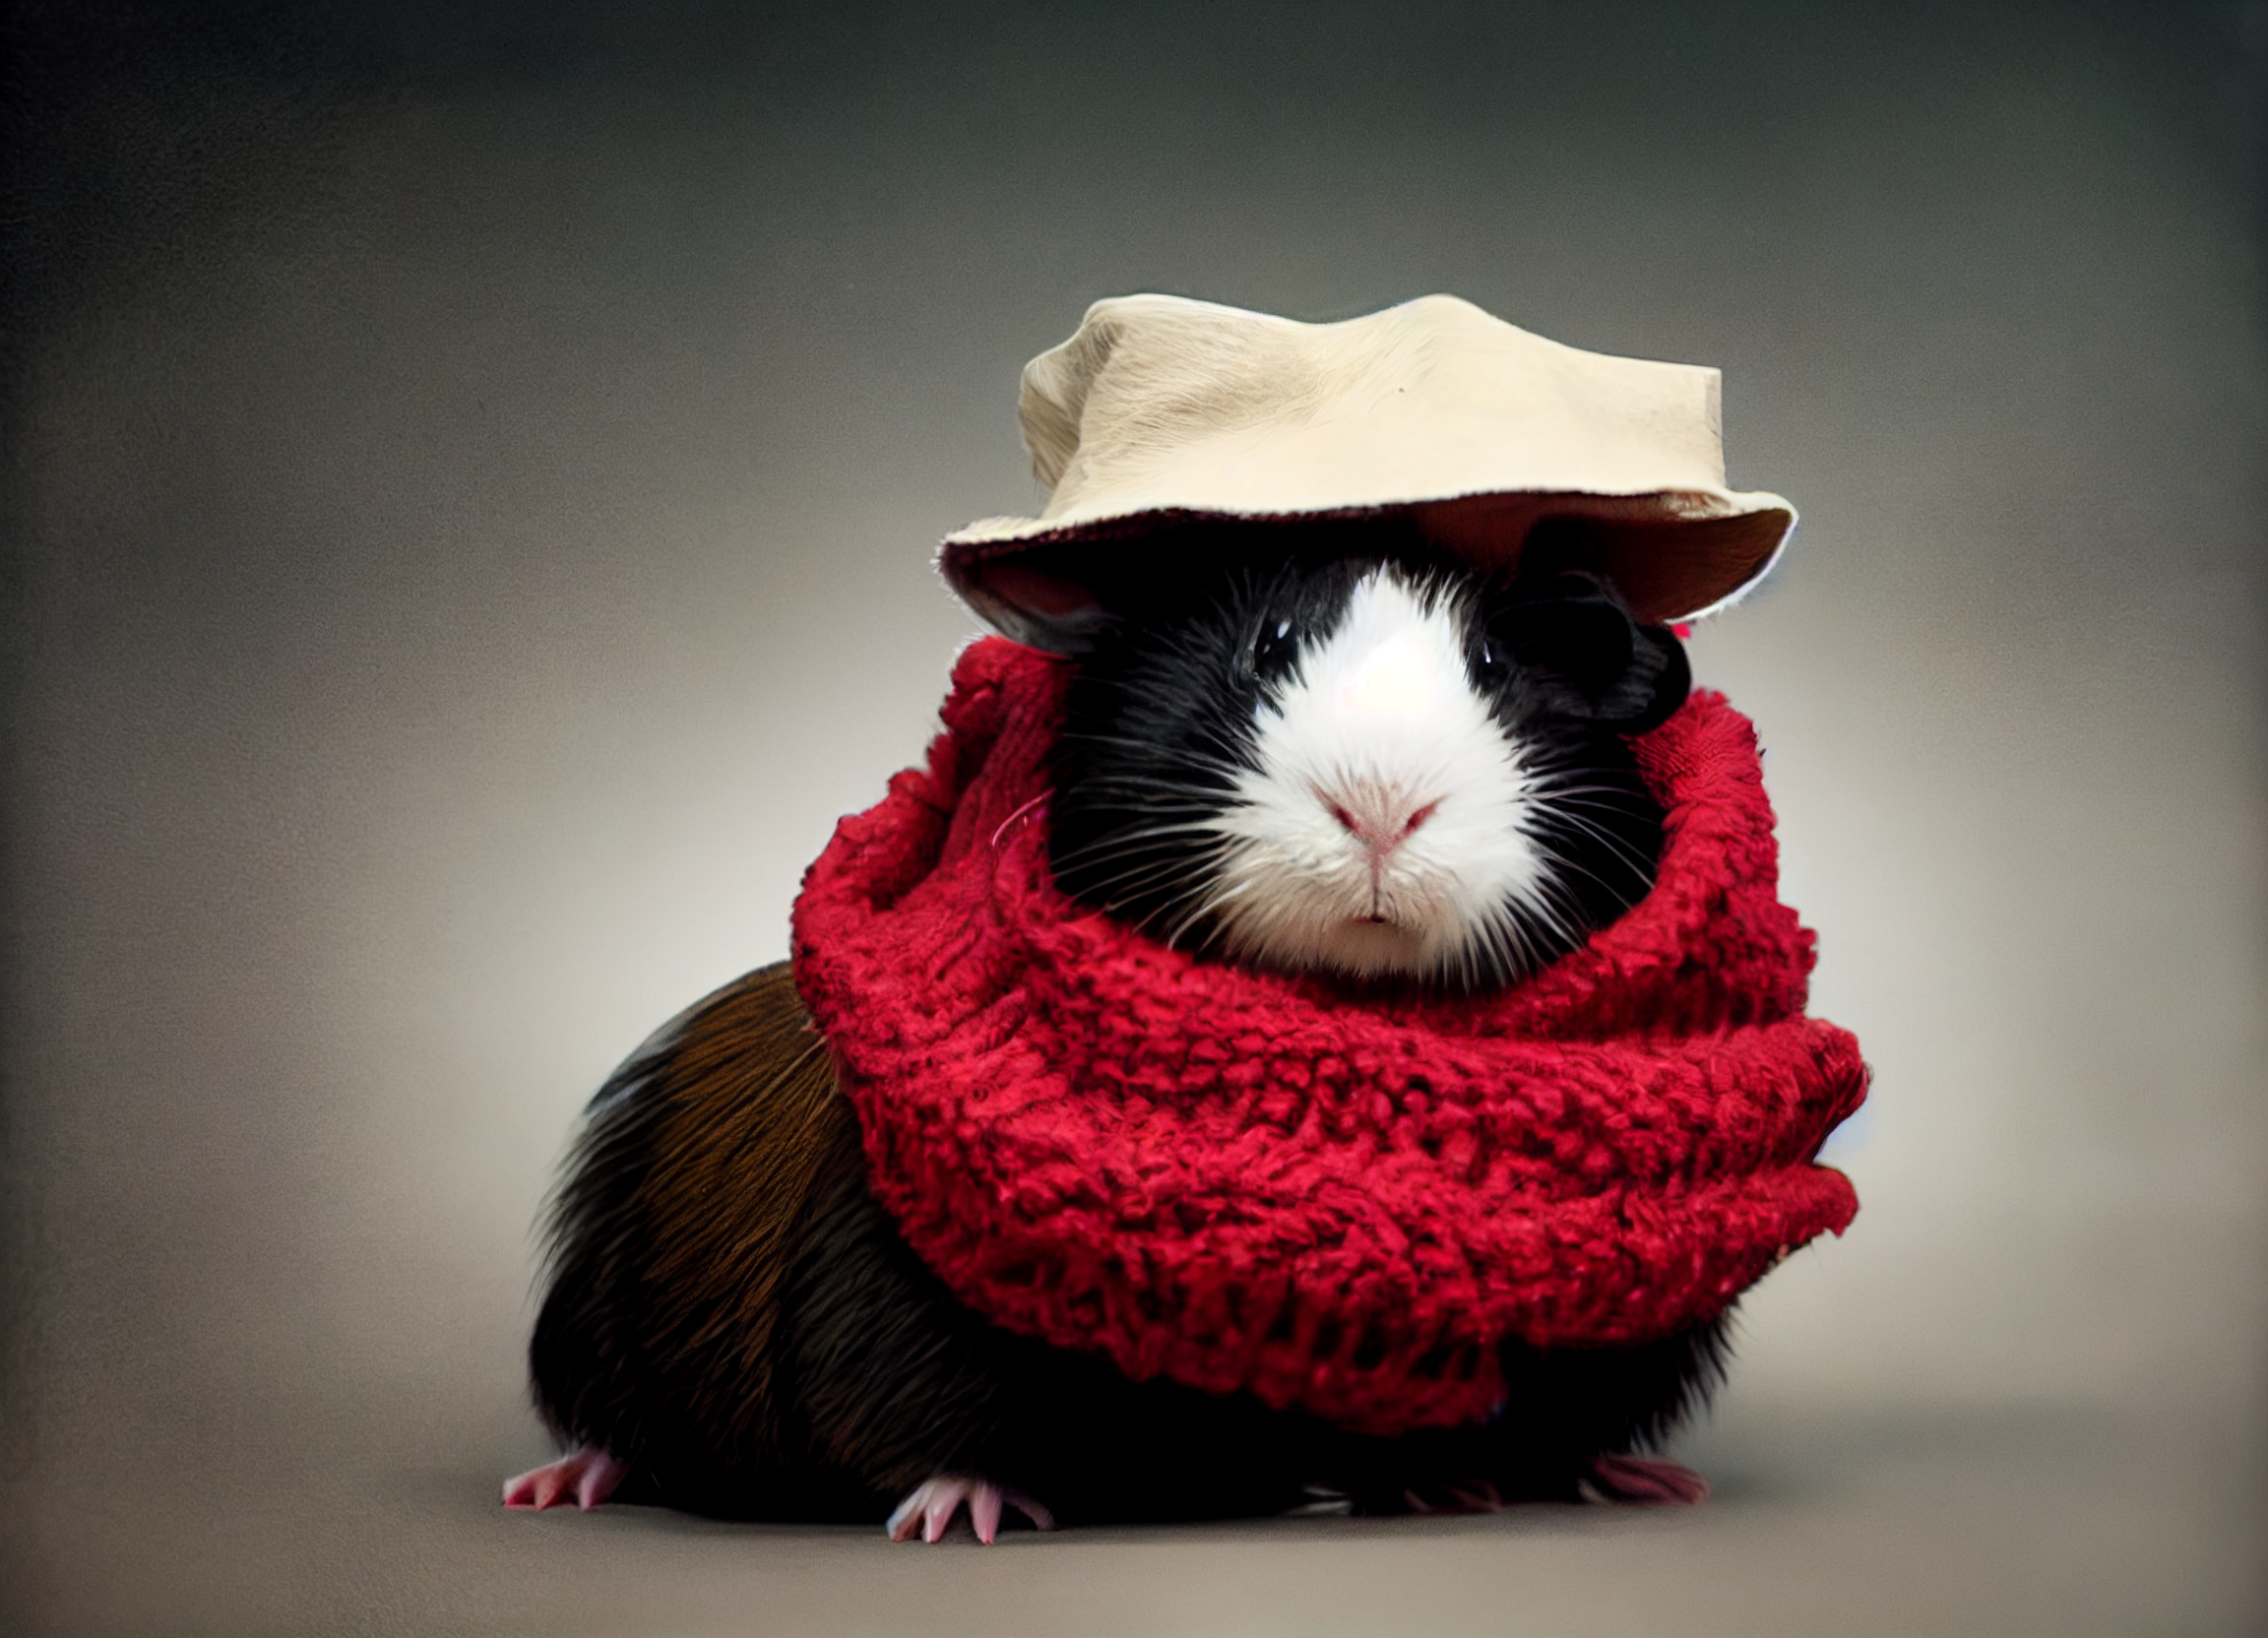 A black guinea pig with a white snout wearing a red scarf and a hat made of a hemp bag.